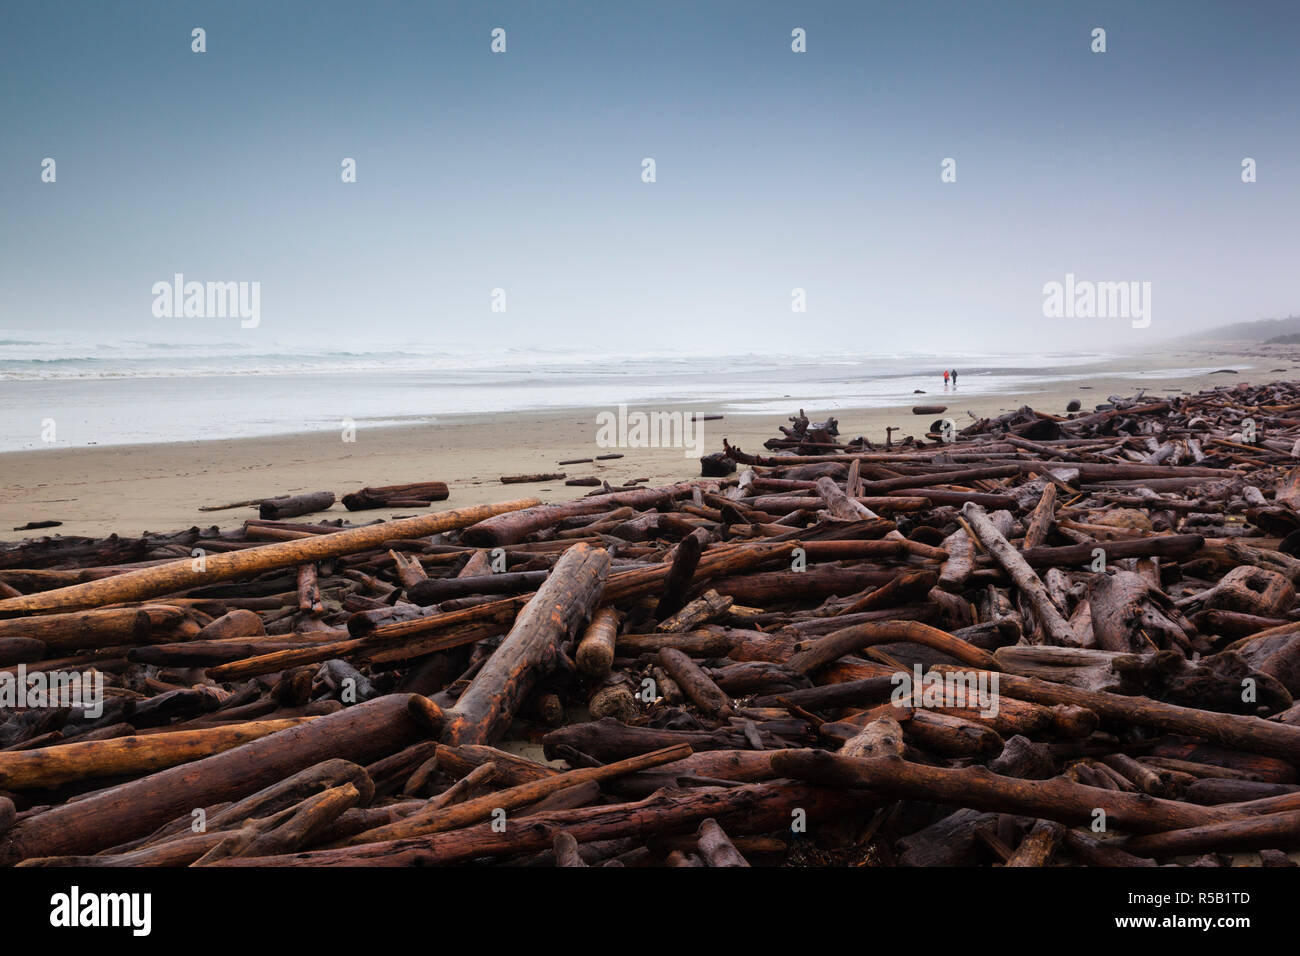 Canada, British Columbia, Vancouver Island, Ucluelet, Long Beach, trees on beach after winter storm Stock Photo